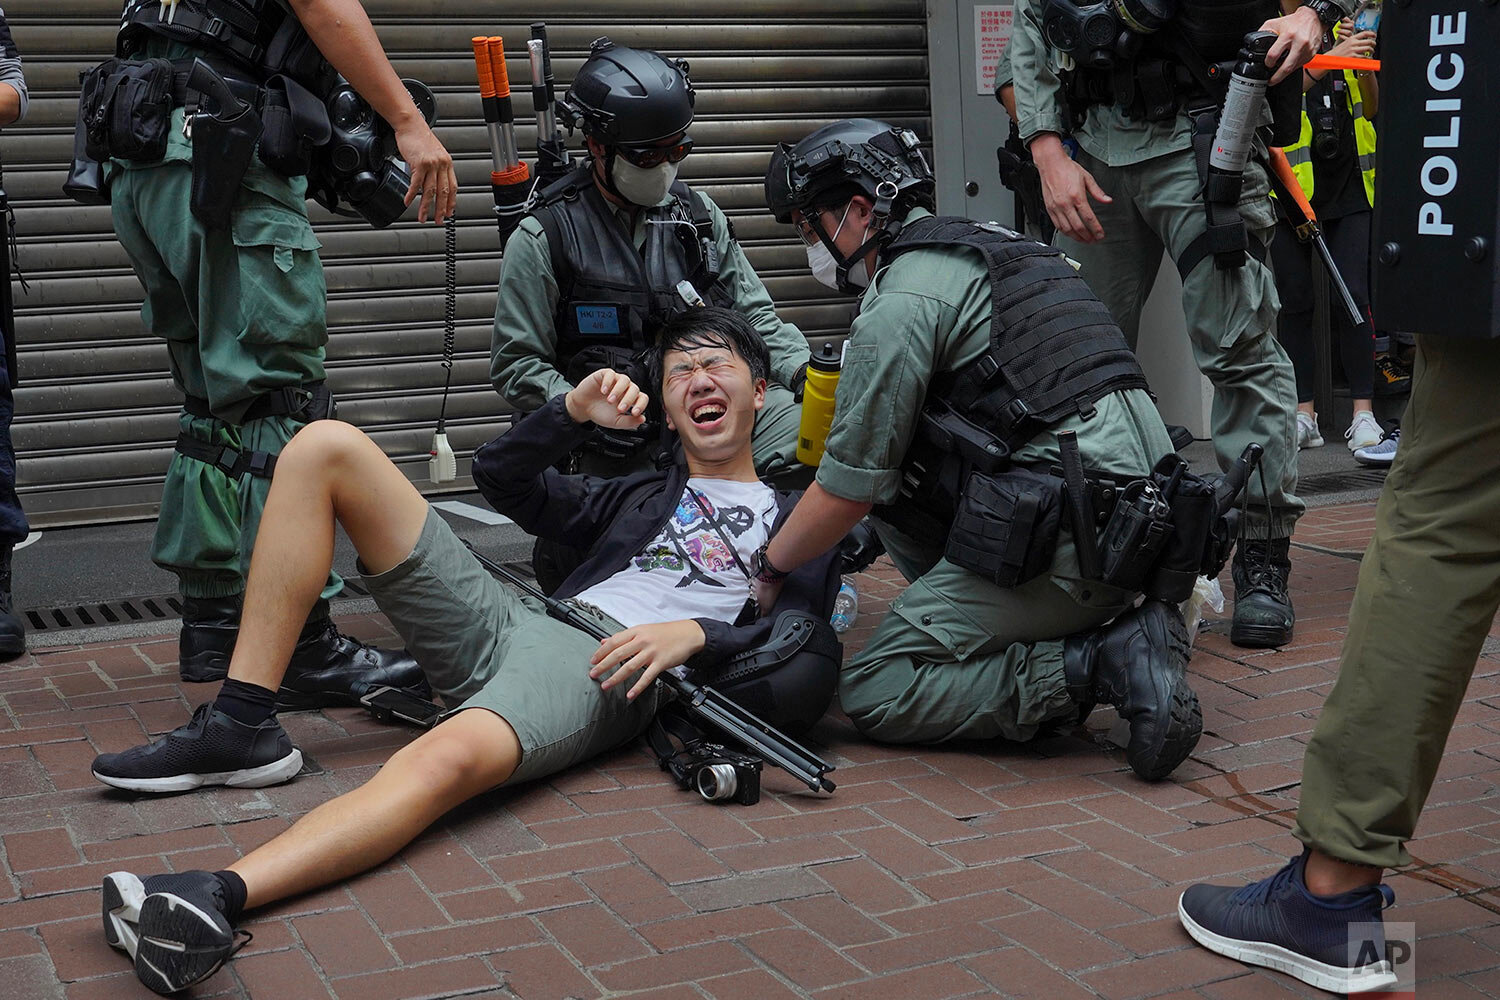  A reporter falls down after being sprayed with pepper spray by police during a protest in Causeway Bay during the annual handover march in Hong Kong, Wednesday, July. 1, 2020.  (AP Photo/Vincent Yu) 